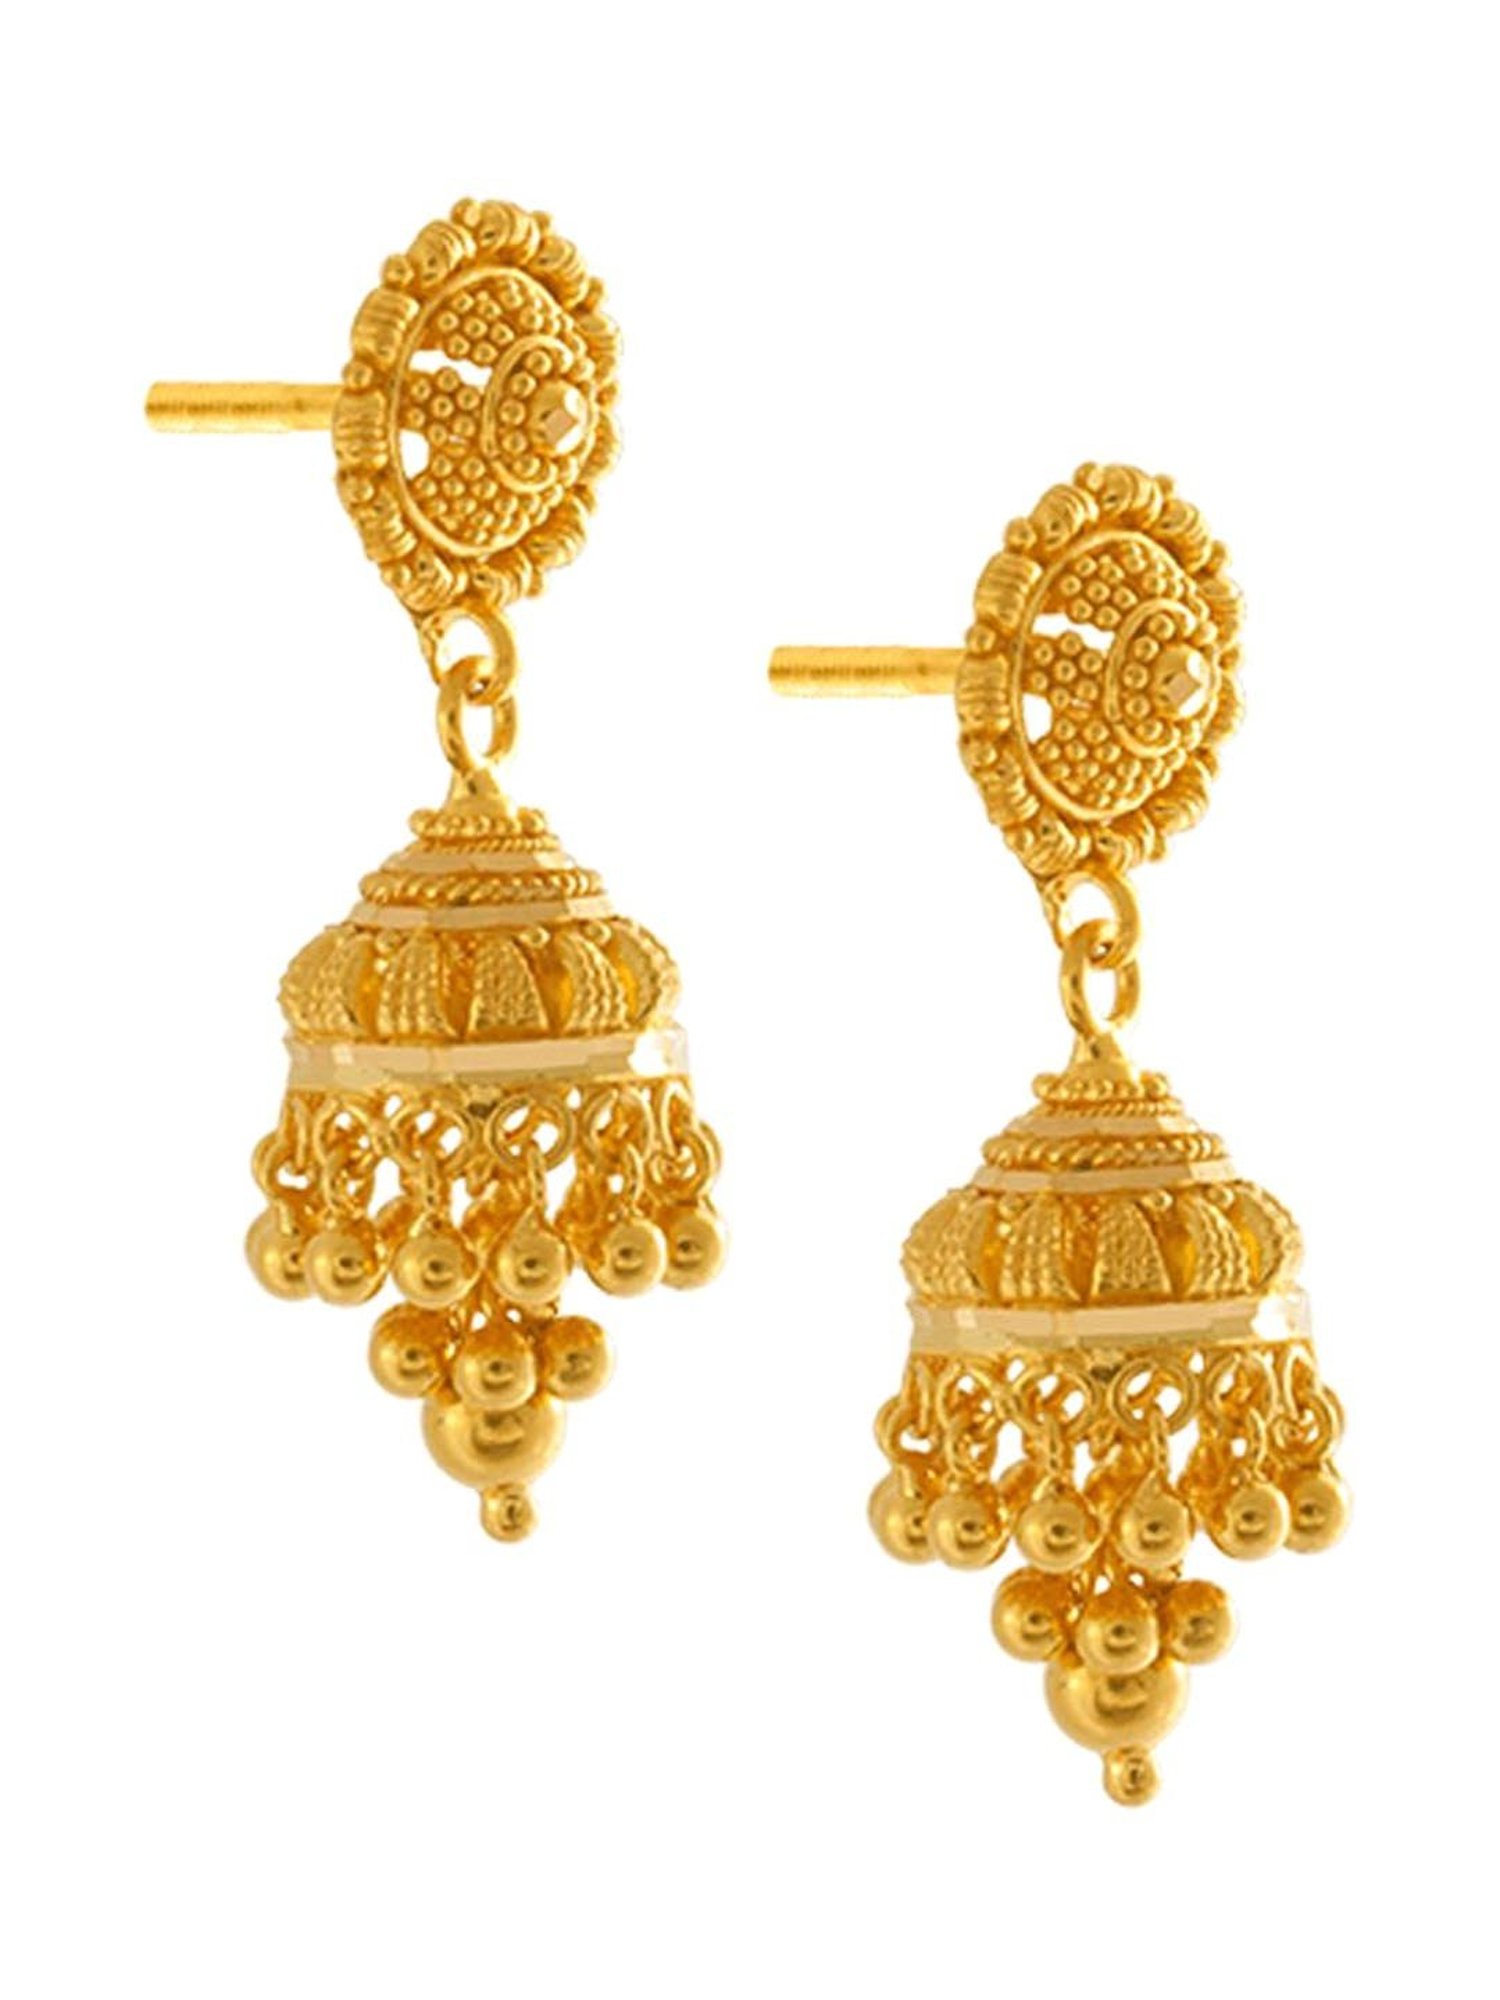 Buy Gold Earrings Online at Best Prices - PC Chandra Jewellers